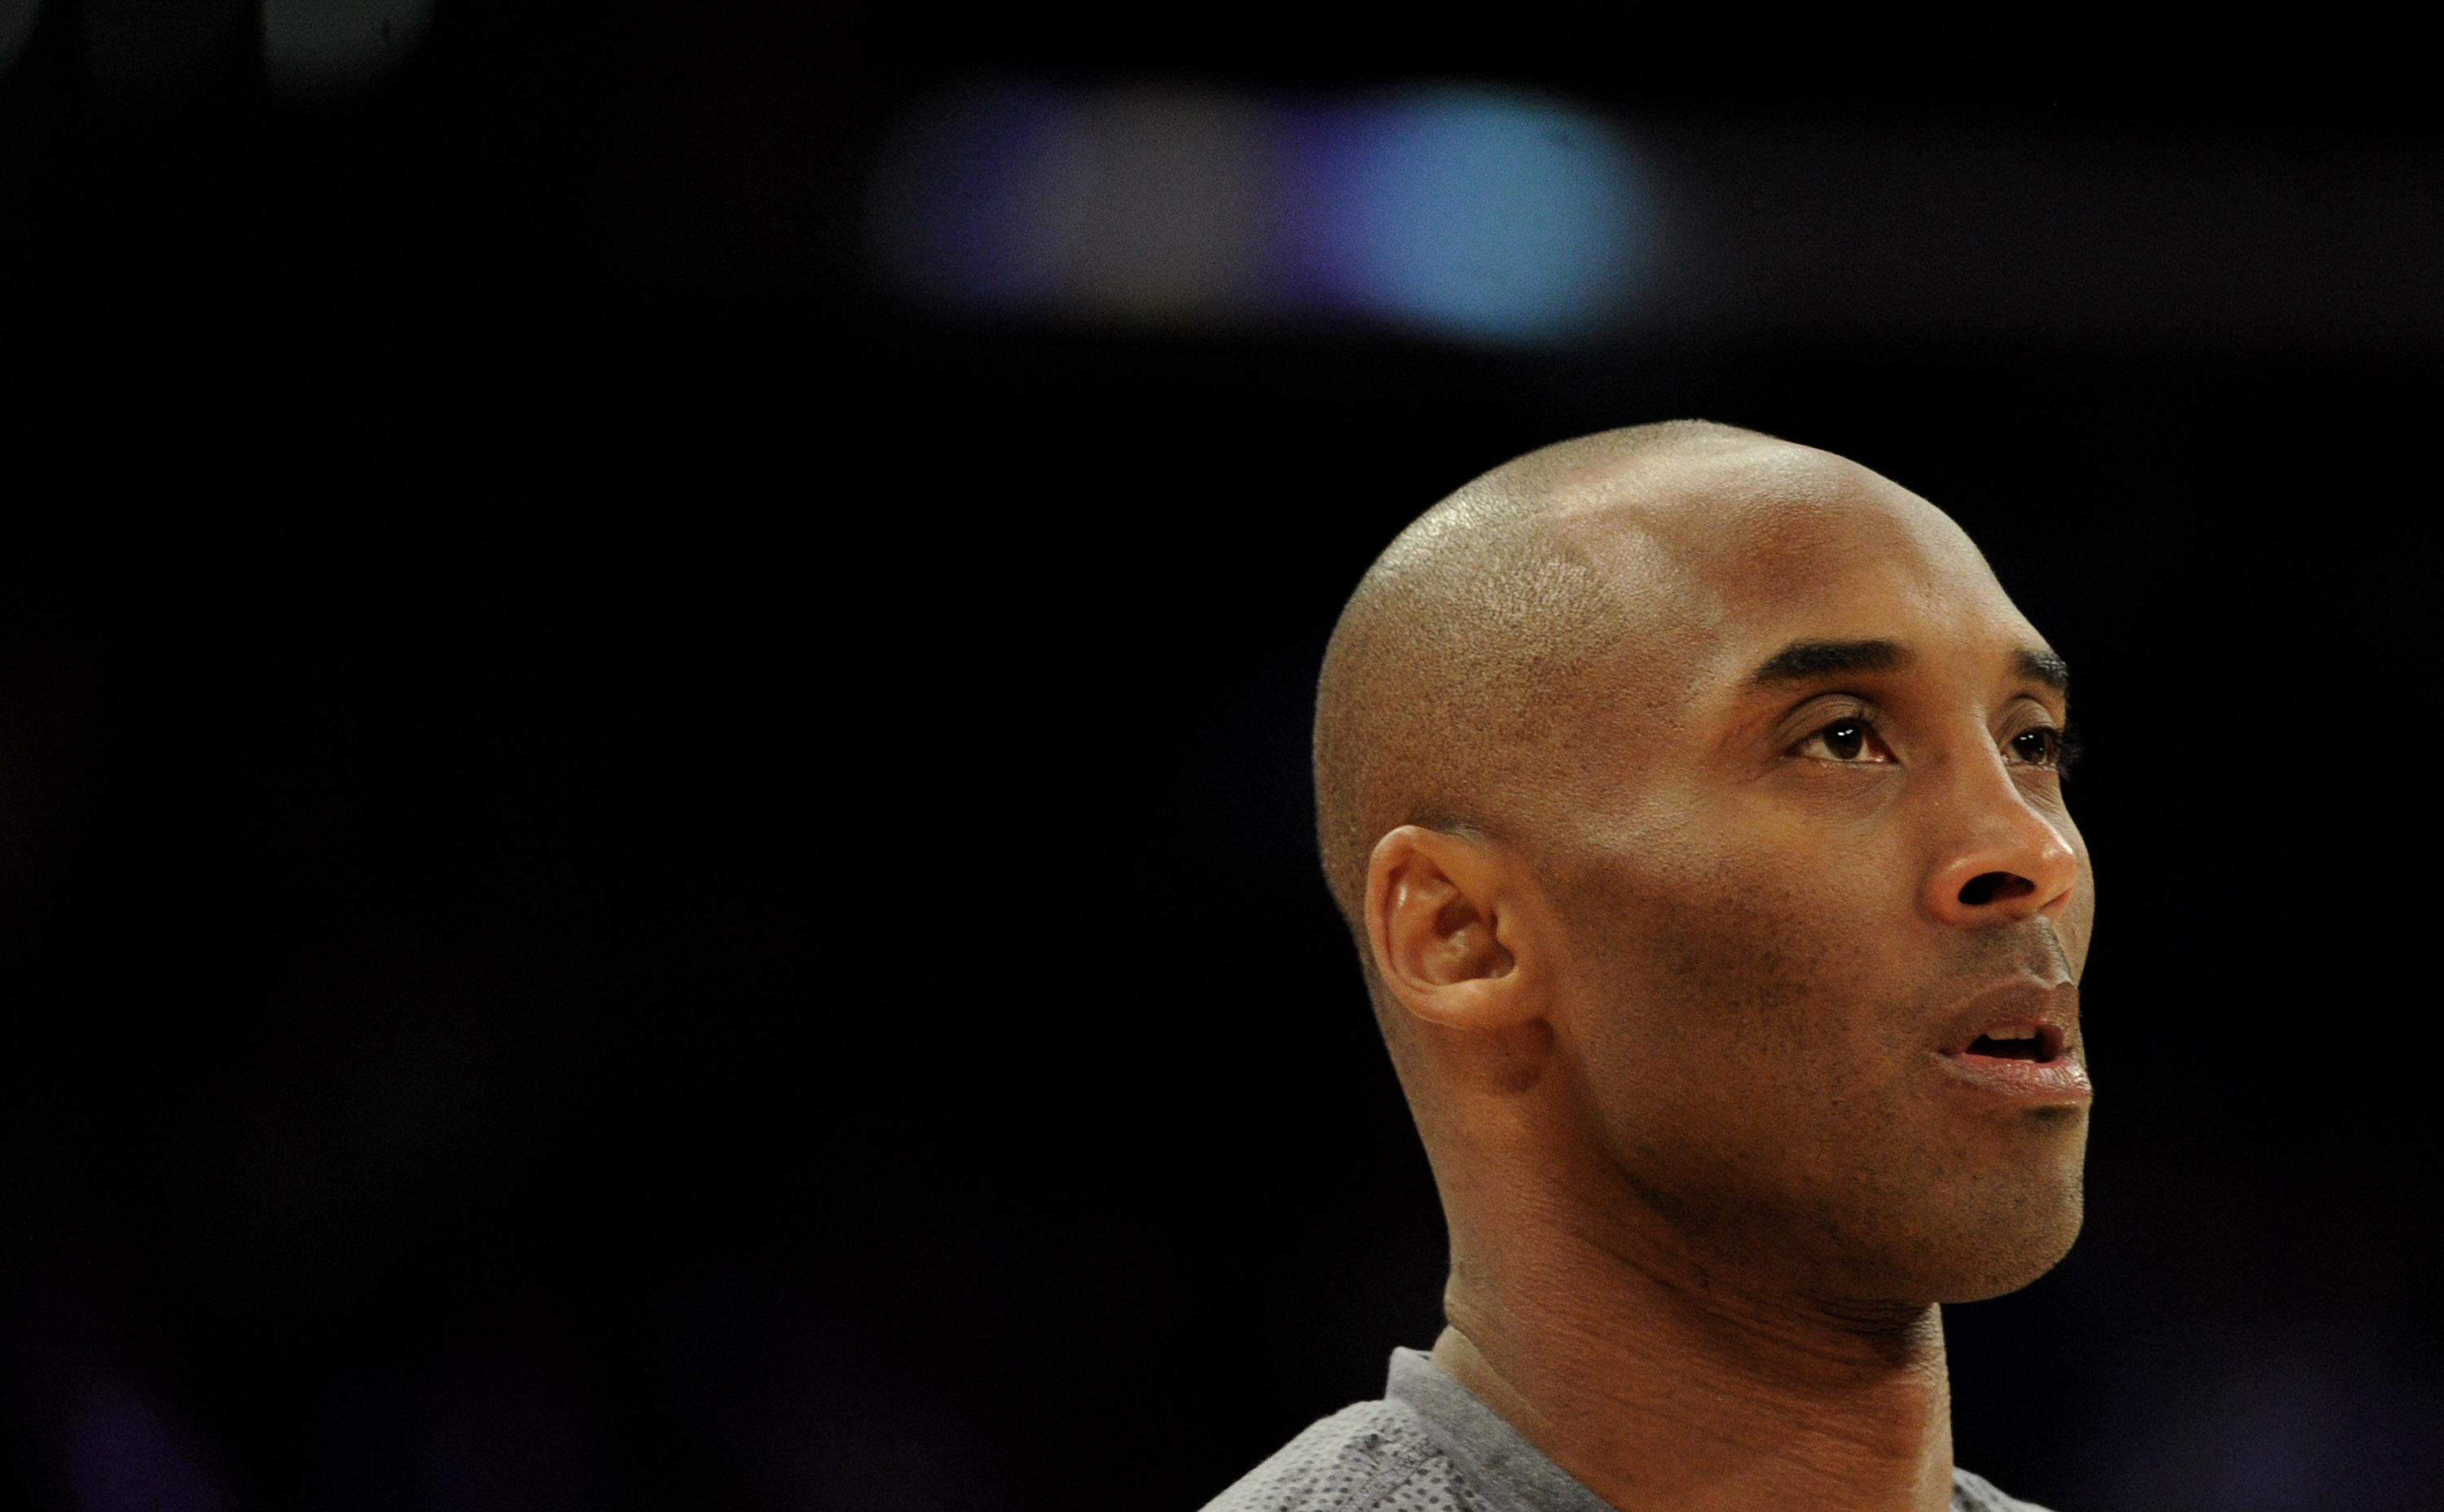 Los Angeles Lakers' Kobe Bryant prior to a NBA basketball game against the Minnesota Timberwolves at Staples Center on Tuesday, Feb. 2, 2015 in Los Angeles.   (Photo by Keith Birmingham/ Pasadena Star-News)